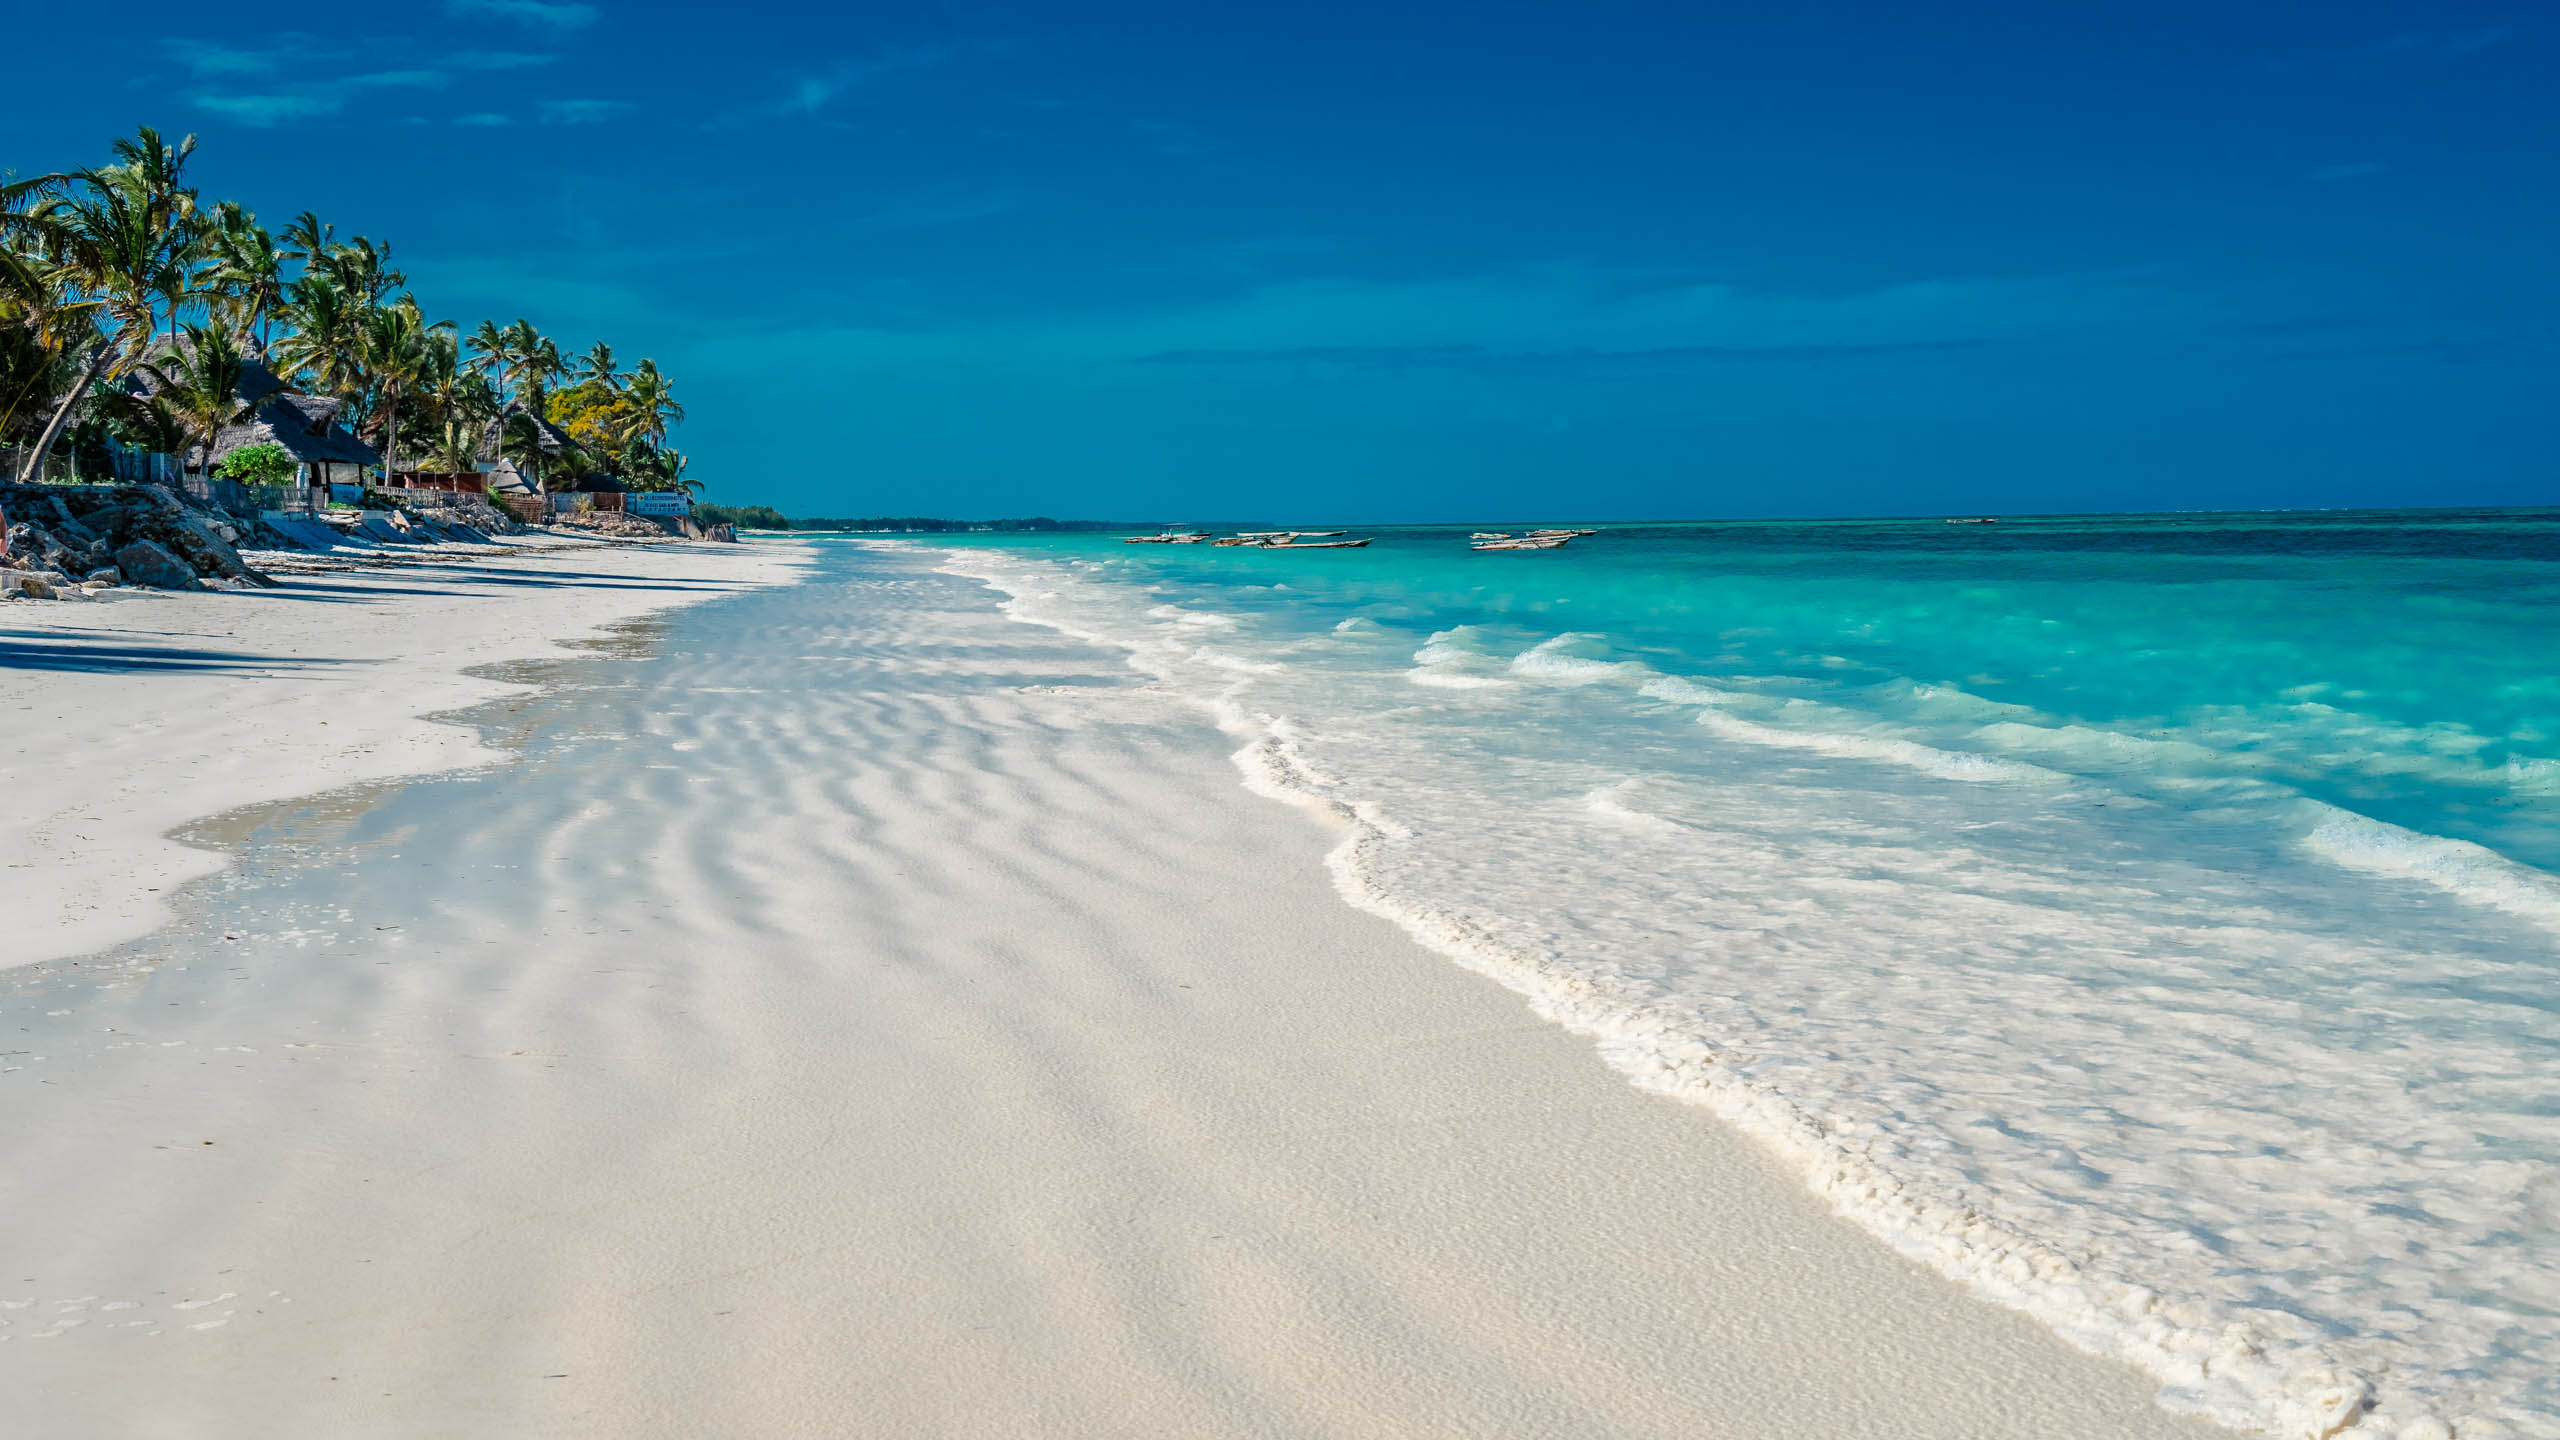 Thumb Nail Image: 5 Where to Find Awesome Beaches in Tanzania